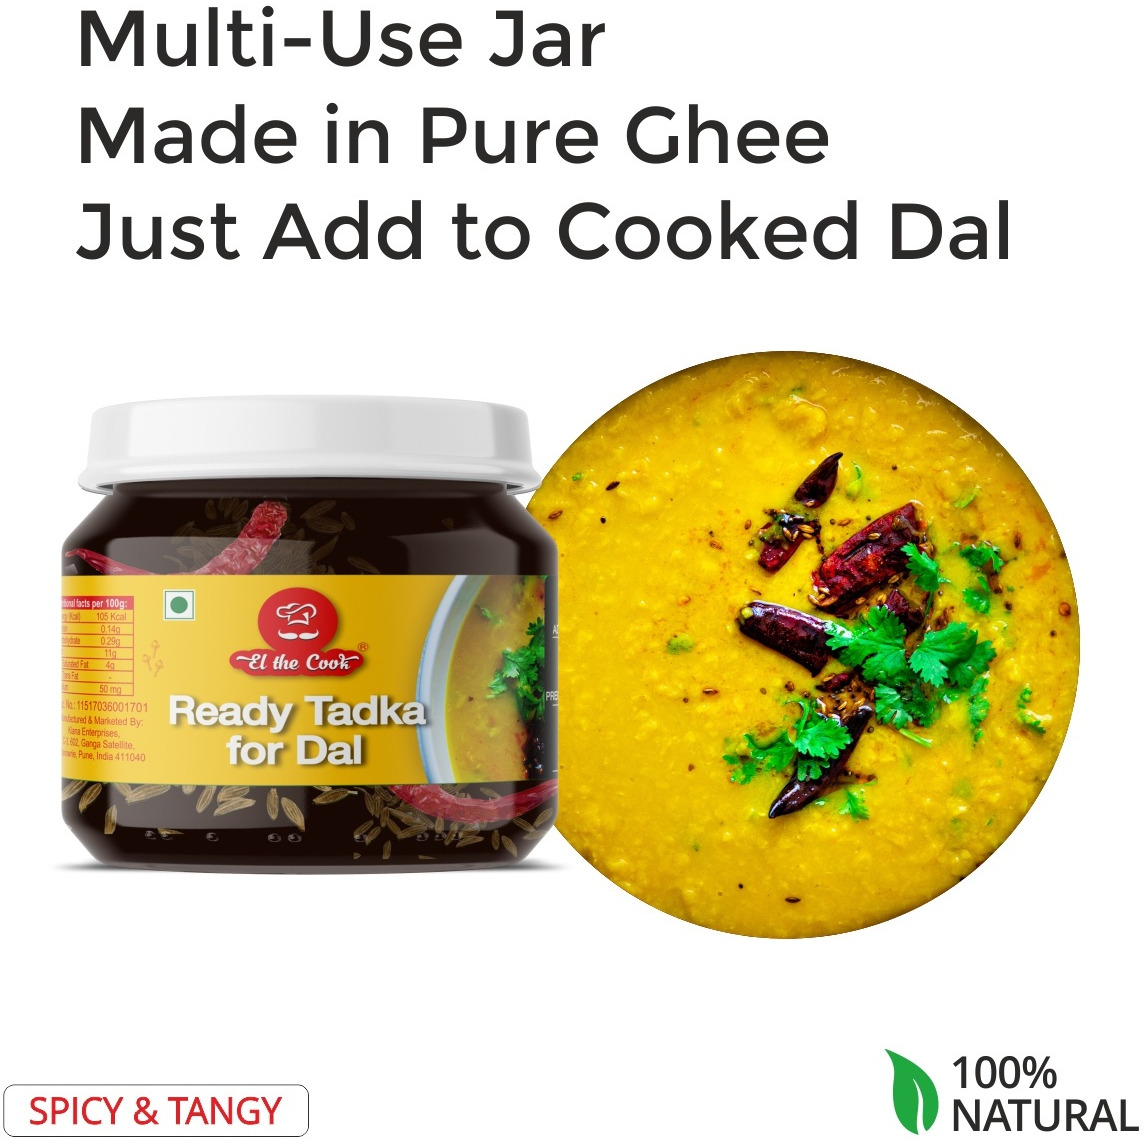 EL The Cook Ready-to-Use Ghee Tadka(CONCENRATED Whole Spice Tempering) for Dal, Indian Lentils Seasoning, Super Saver Jar Pack, 6.34oz, Vegetarian, Gluten-Free (Flavor: Dal Tadka)